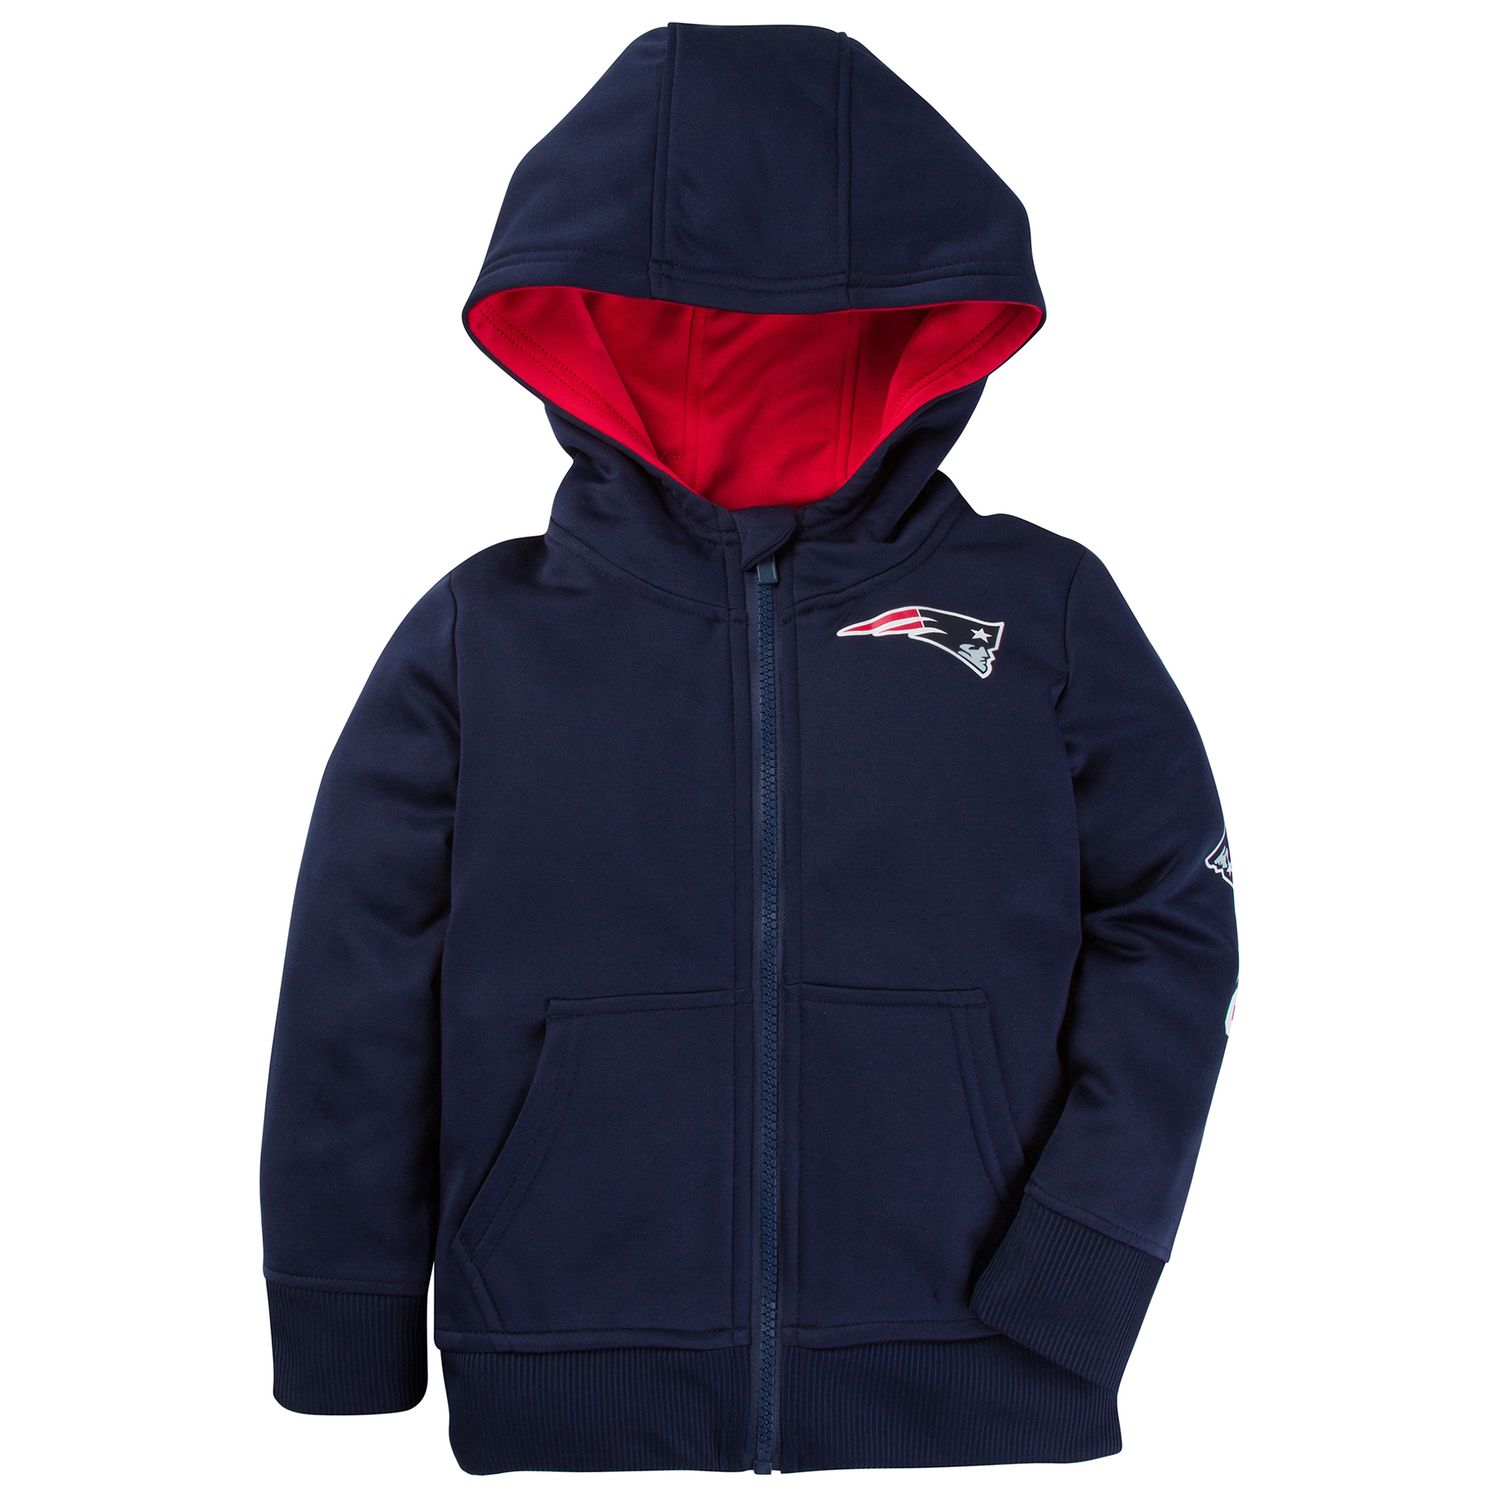 Toddler New England Patriots Hoodie